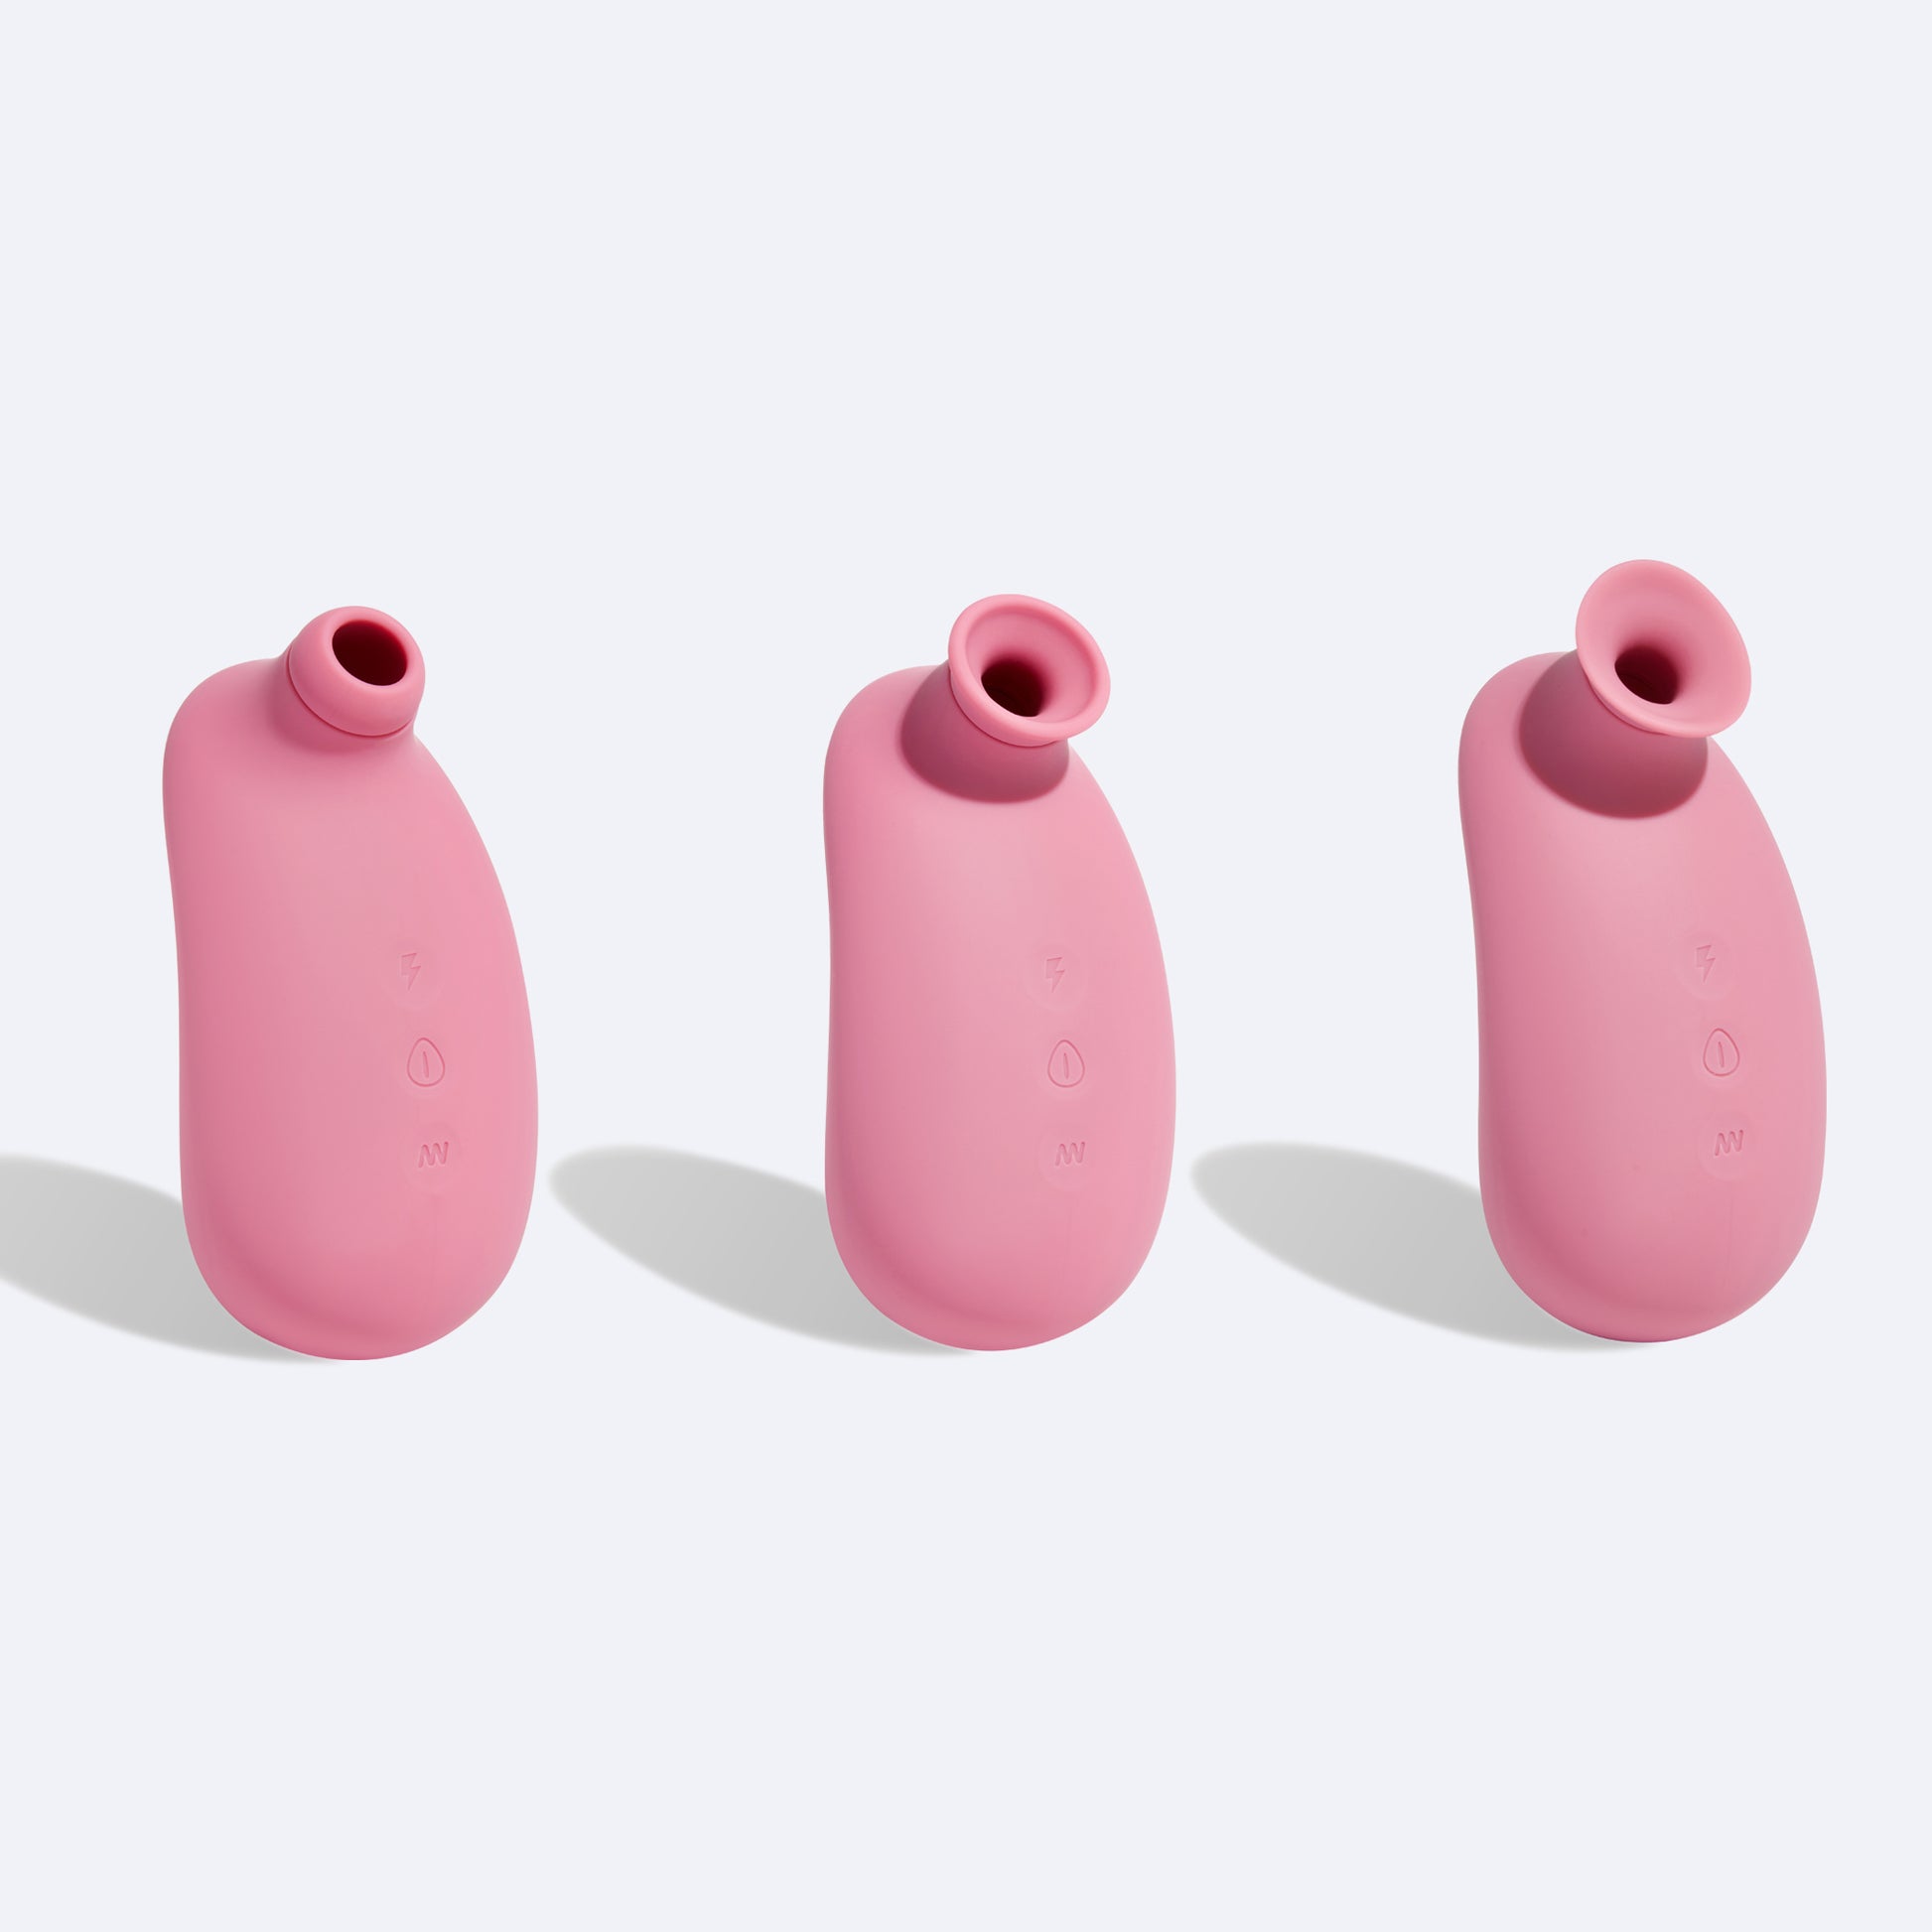 Our CHI Air Suction Vibrator comes with 3 interchangeable suction heads